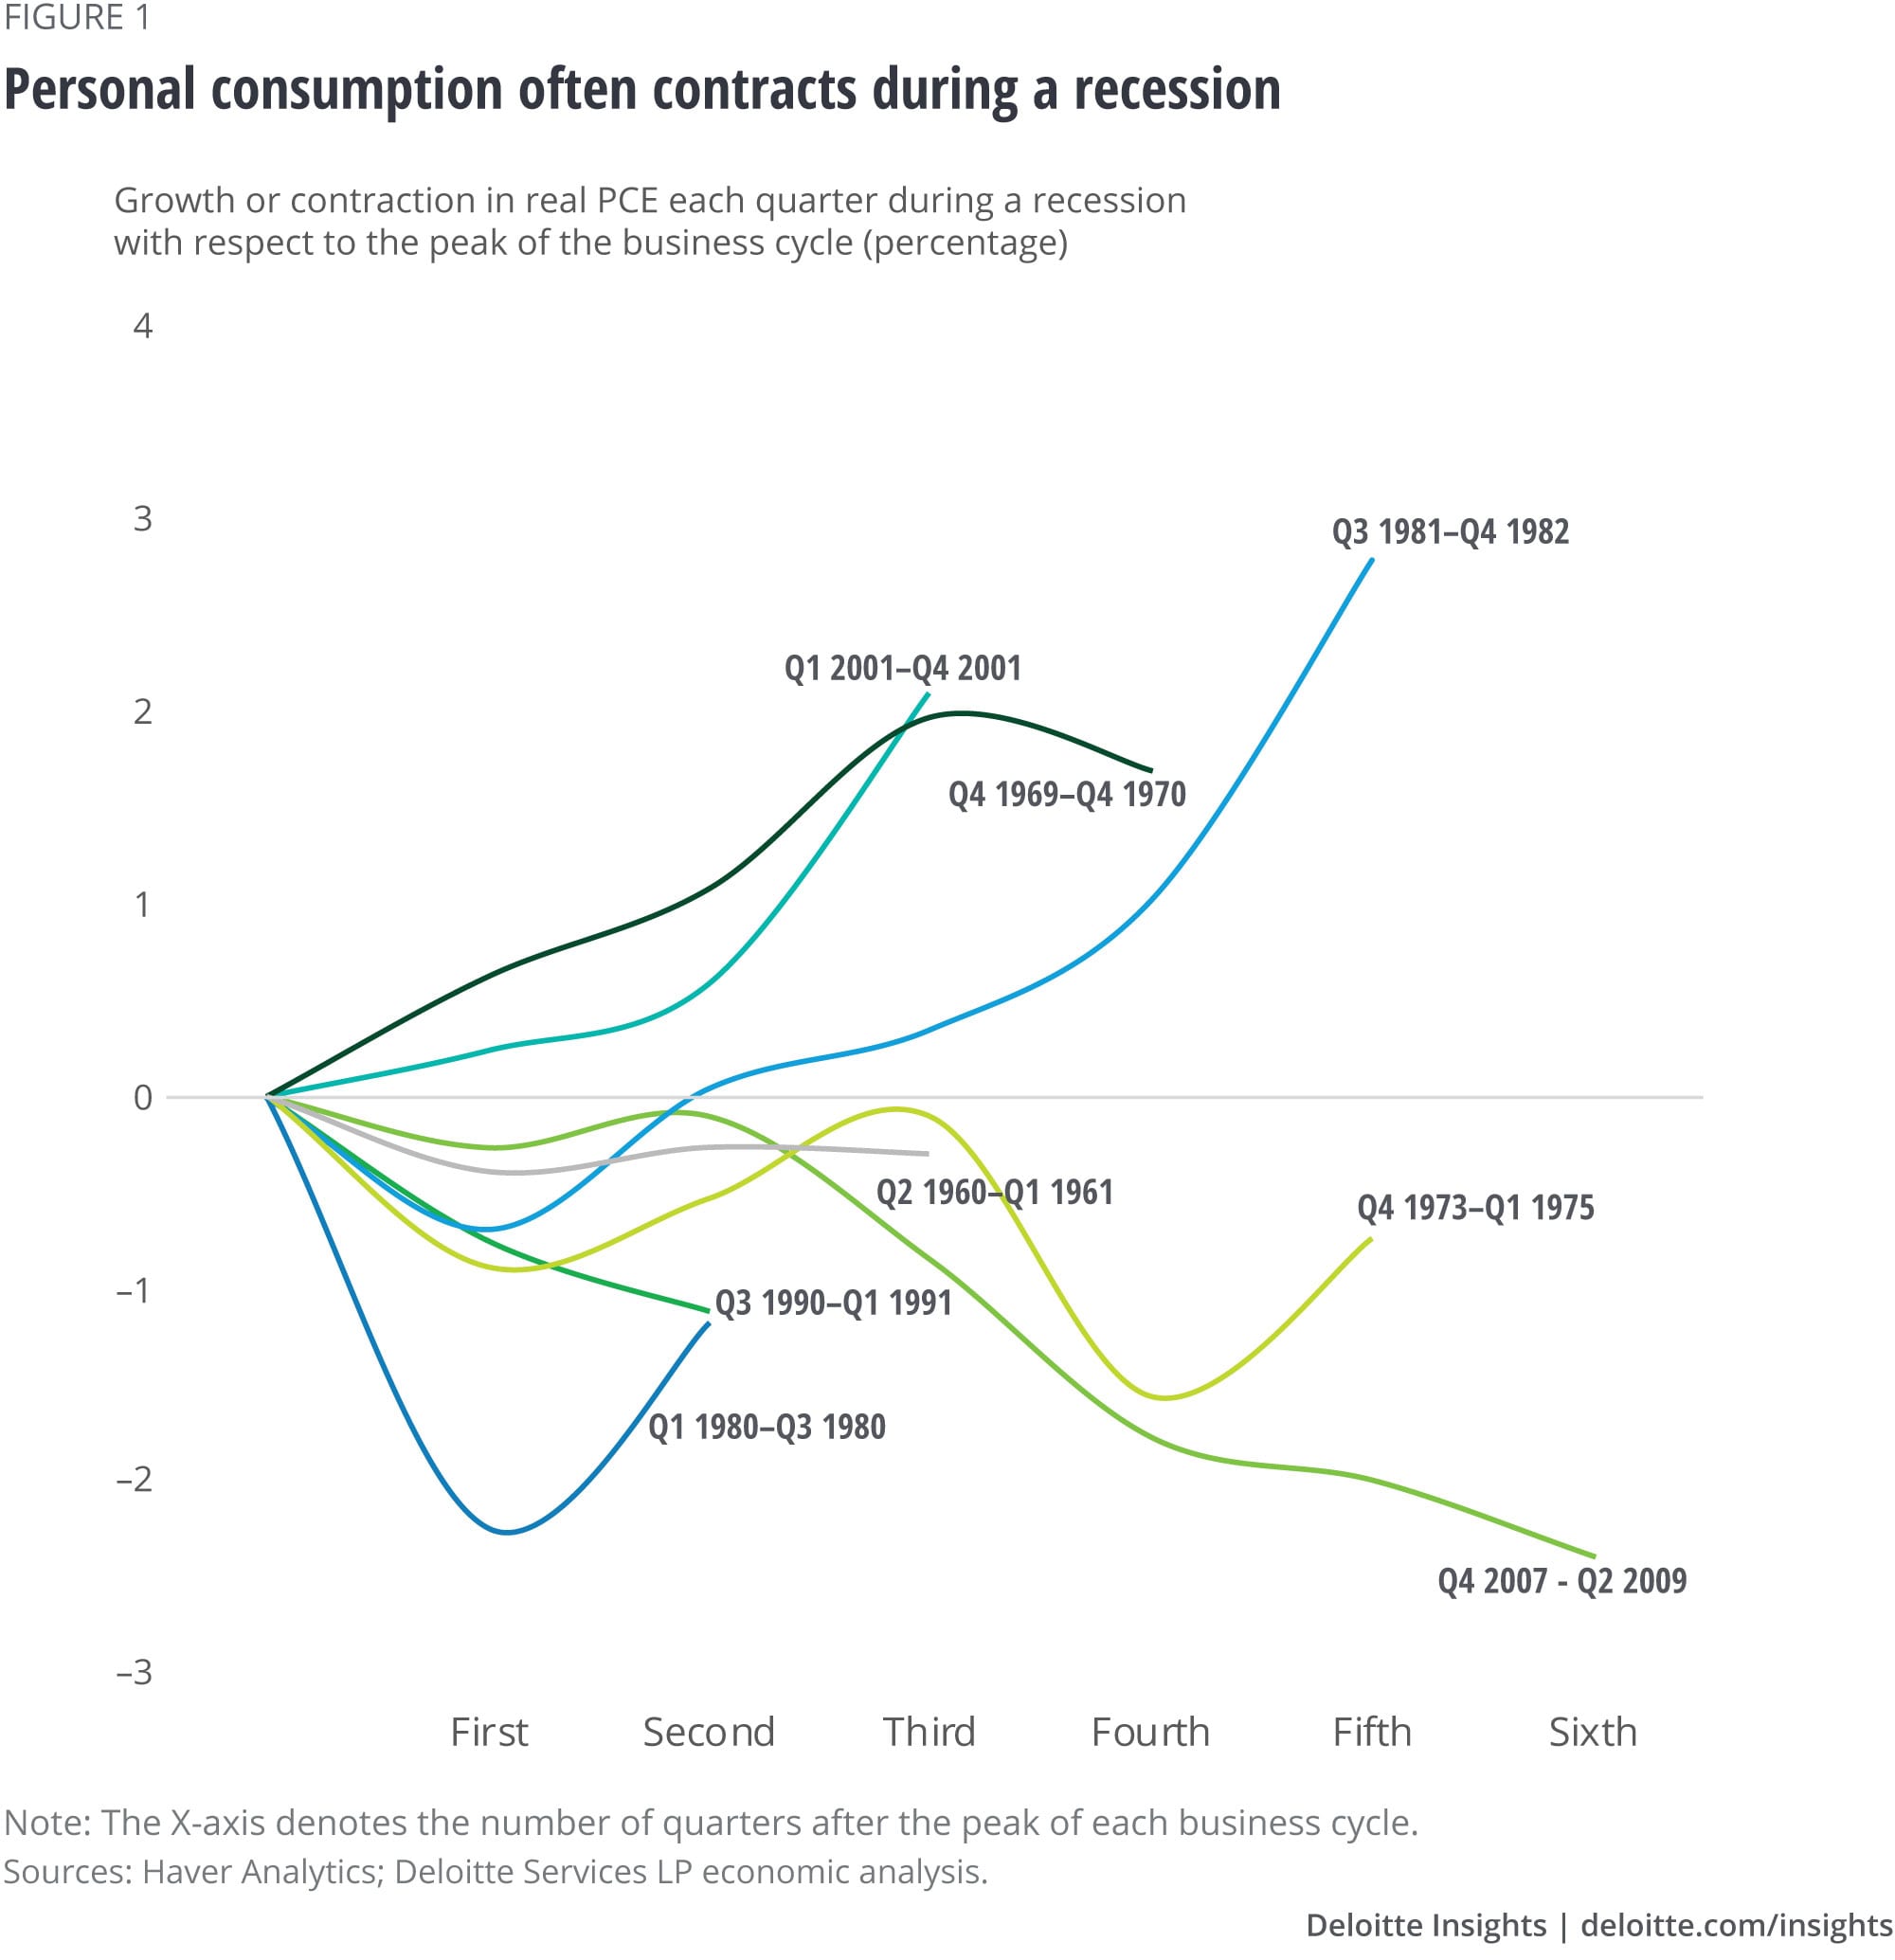 Personal consumption often contracts during a recession